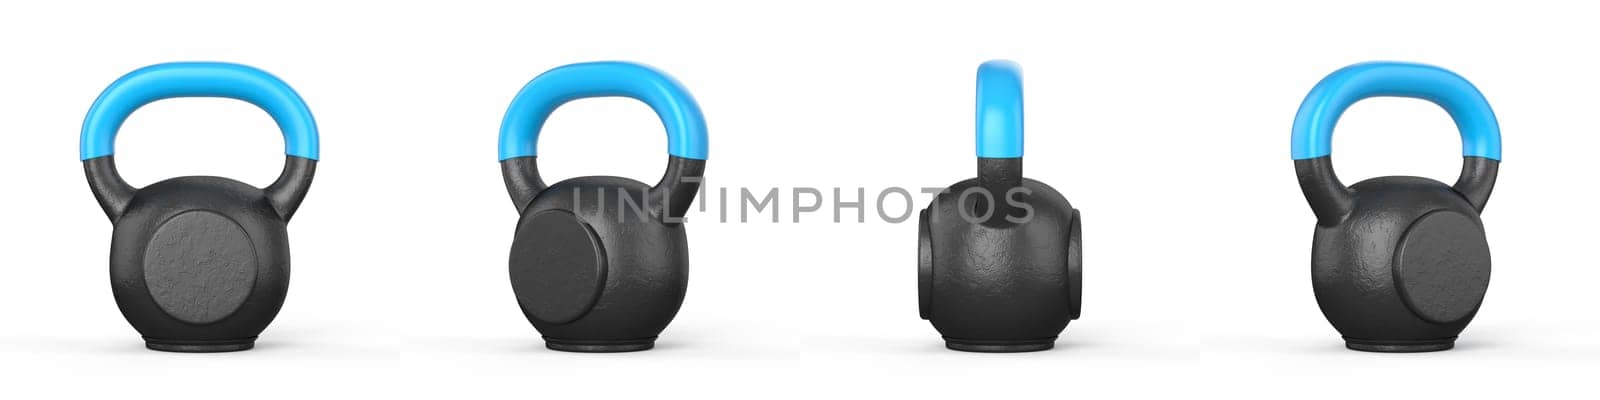 Kettle bell weights 3D rendering illustration isolated on white background